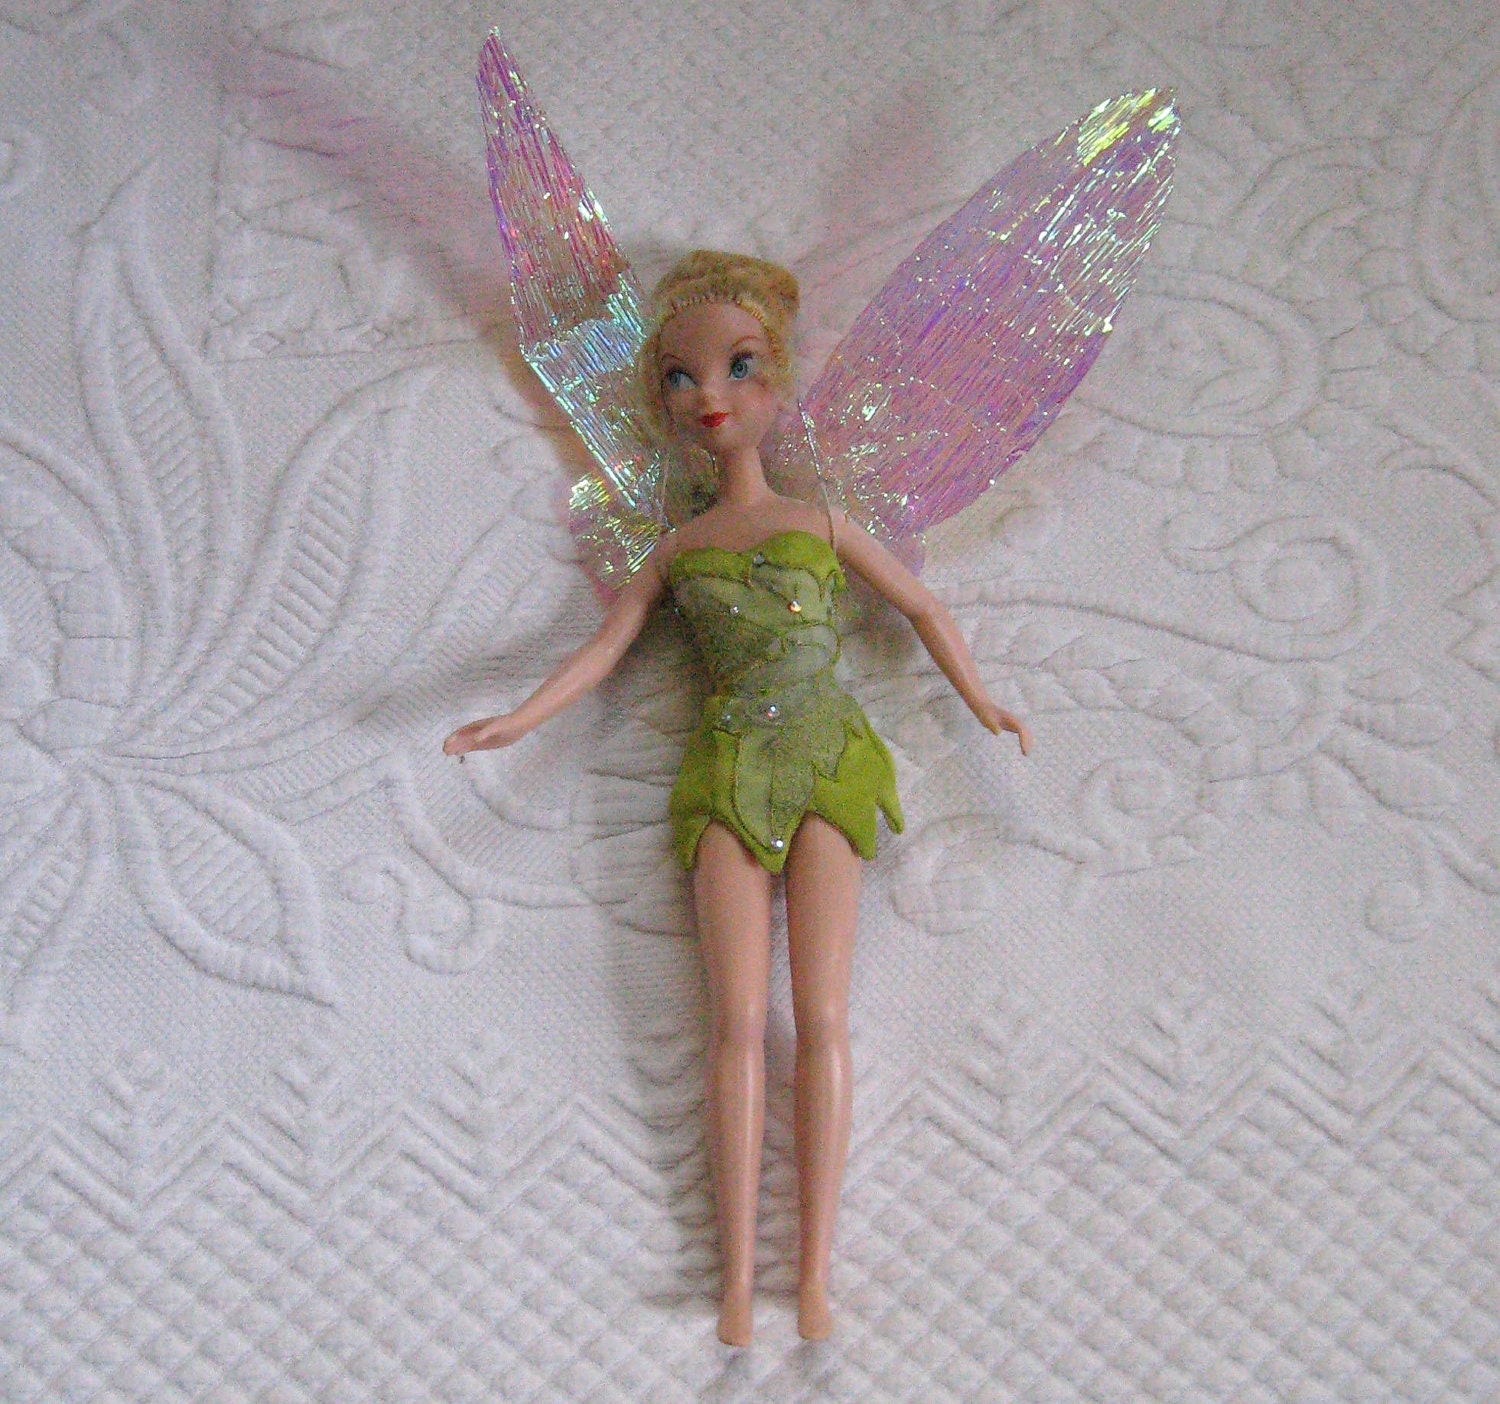 Tinkerbell Plays With Real Erotic Doll Telegraph